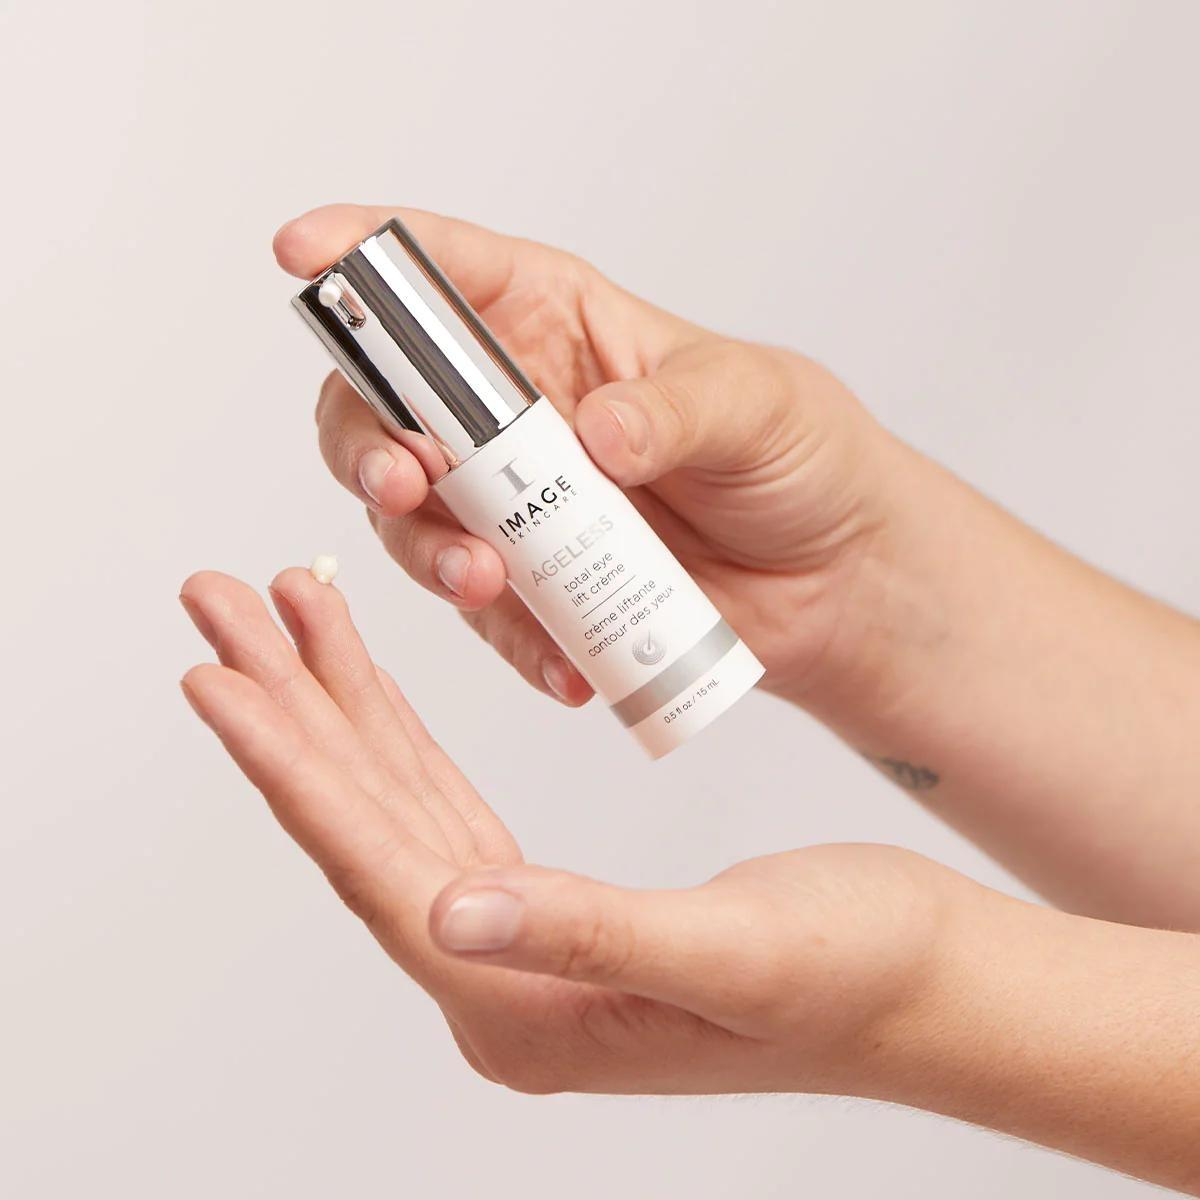 IMAGE Skincare Ageless Total Eye Lift Creme in hands 